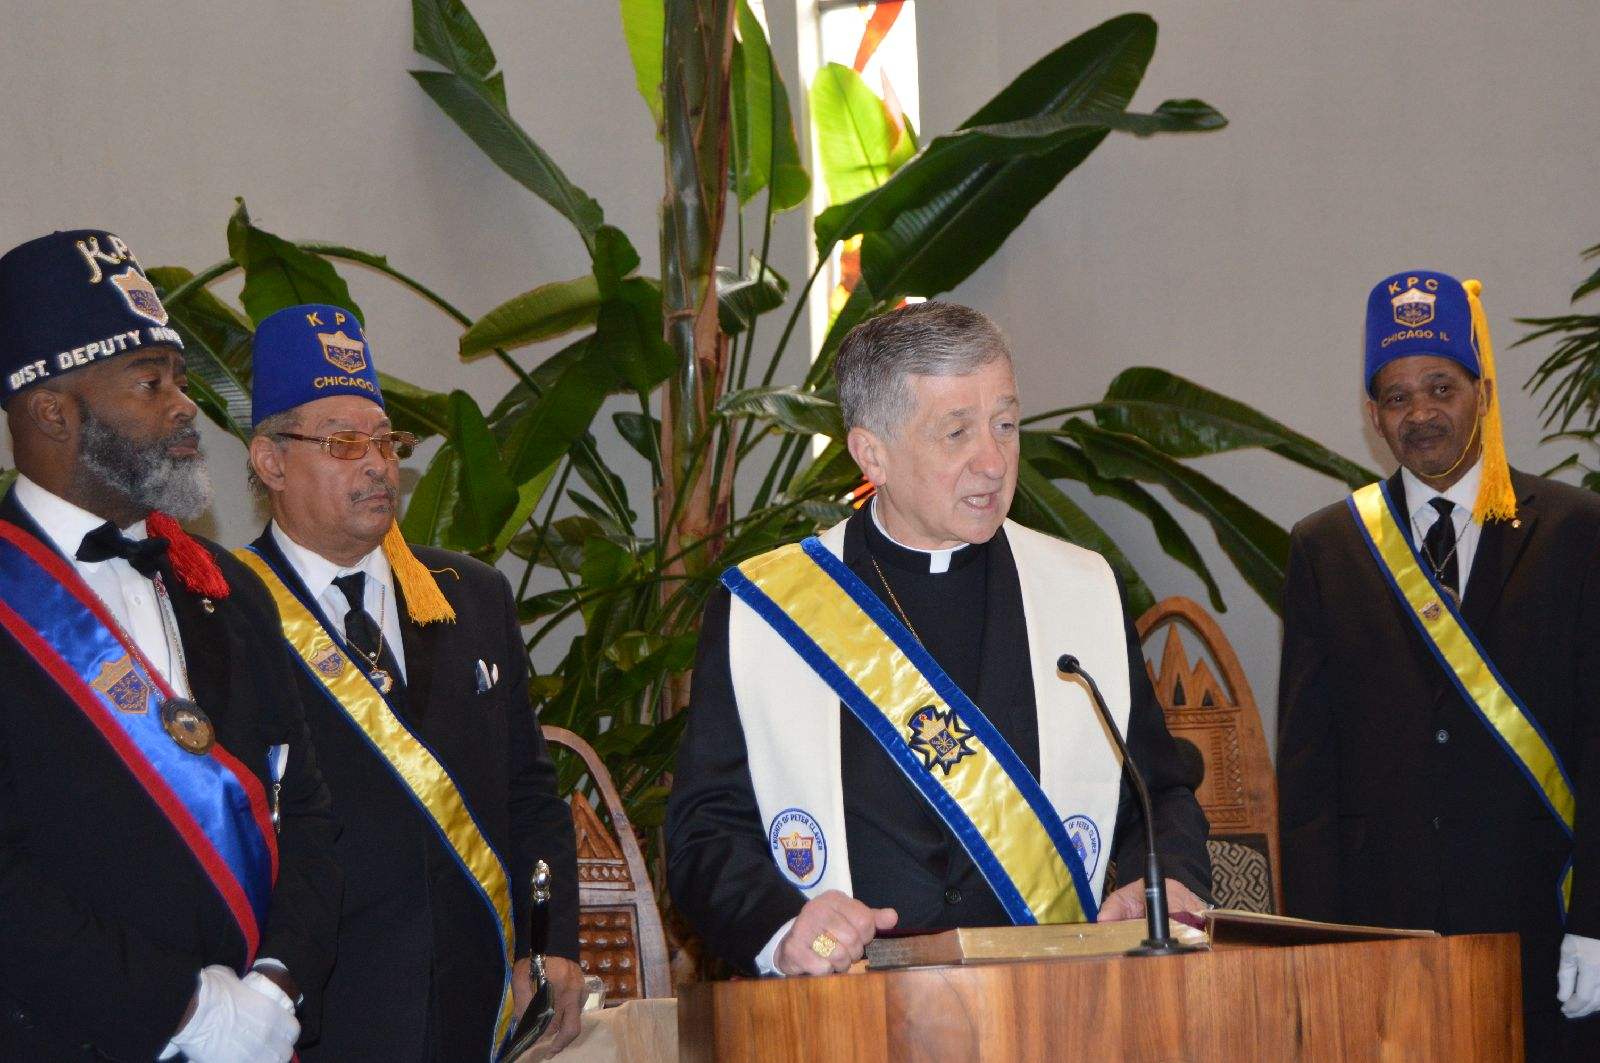 Caridnal Cupich at podium with Knights of Peter Claver